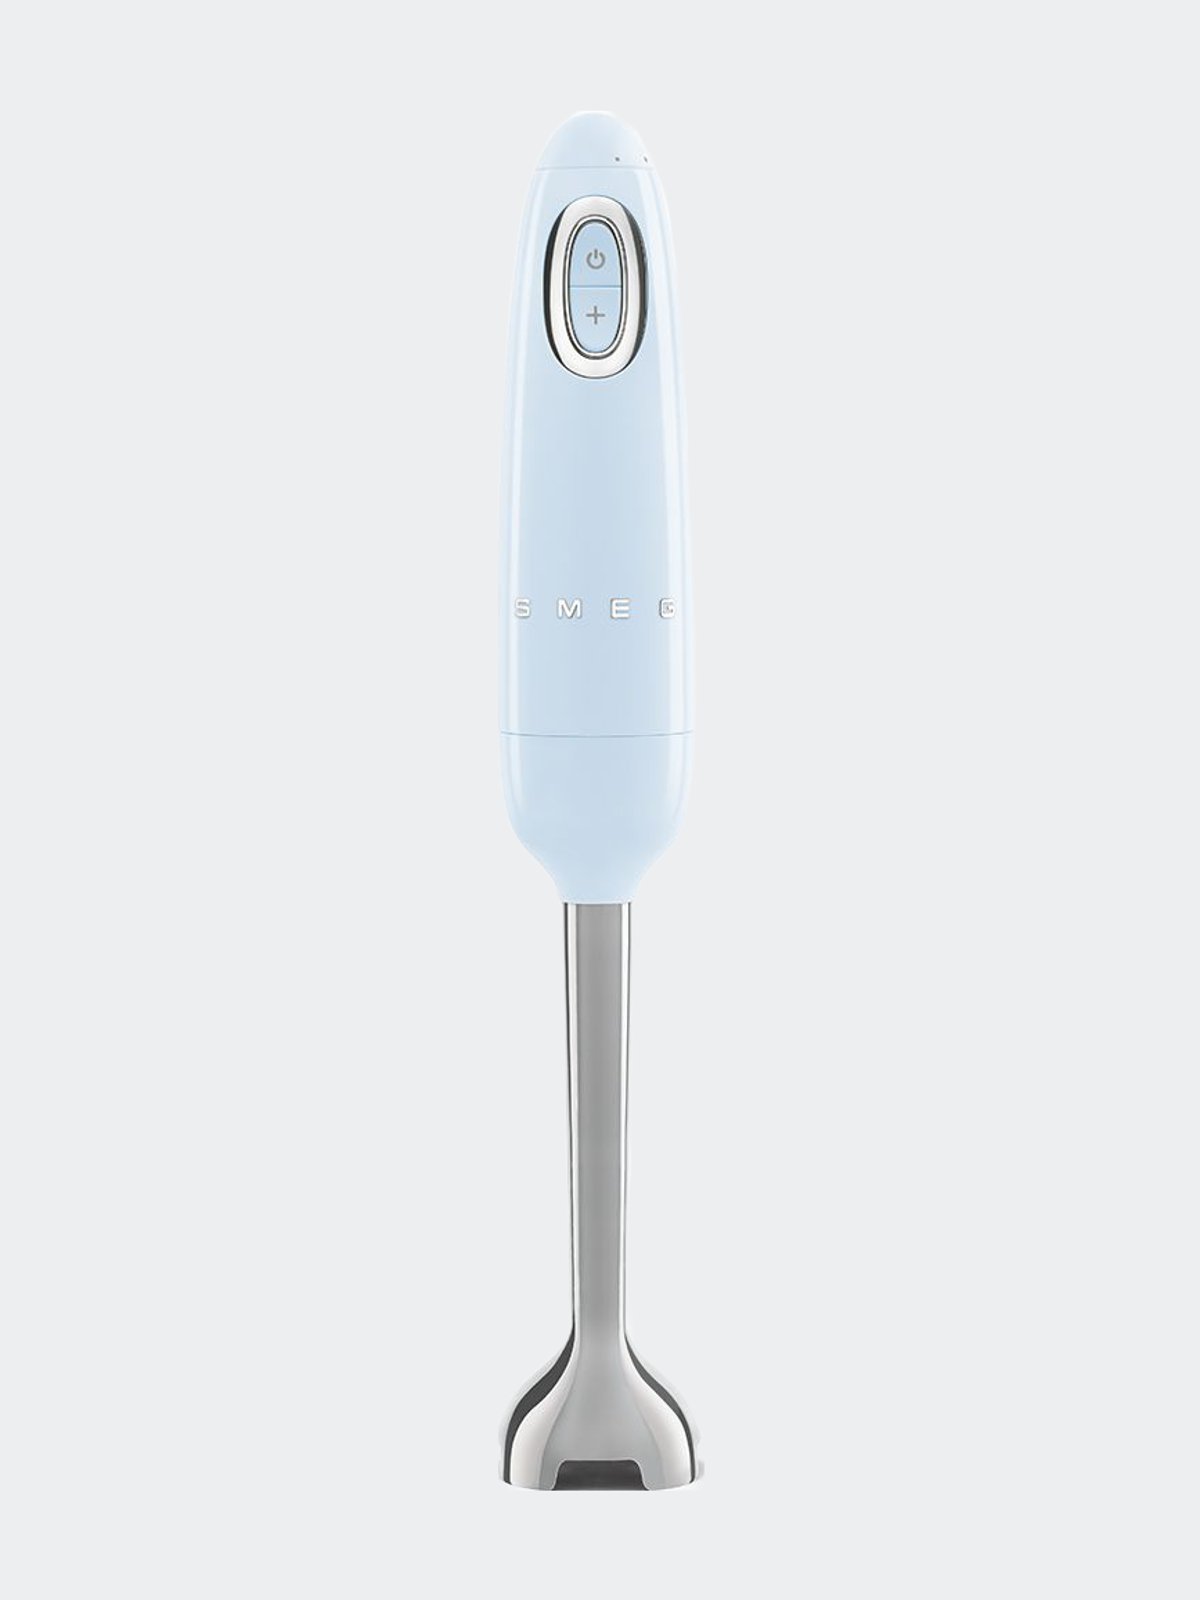 Be in to win a SMEG hand blender!  We have 48 SMEG hand blenders to give  away, valued at $450 each! Simply join Clubcard between 11-24 January and  you'll be in